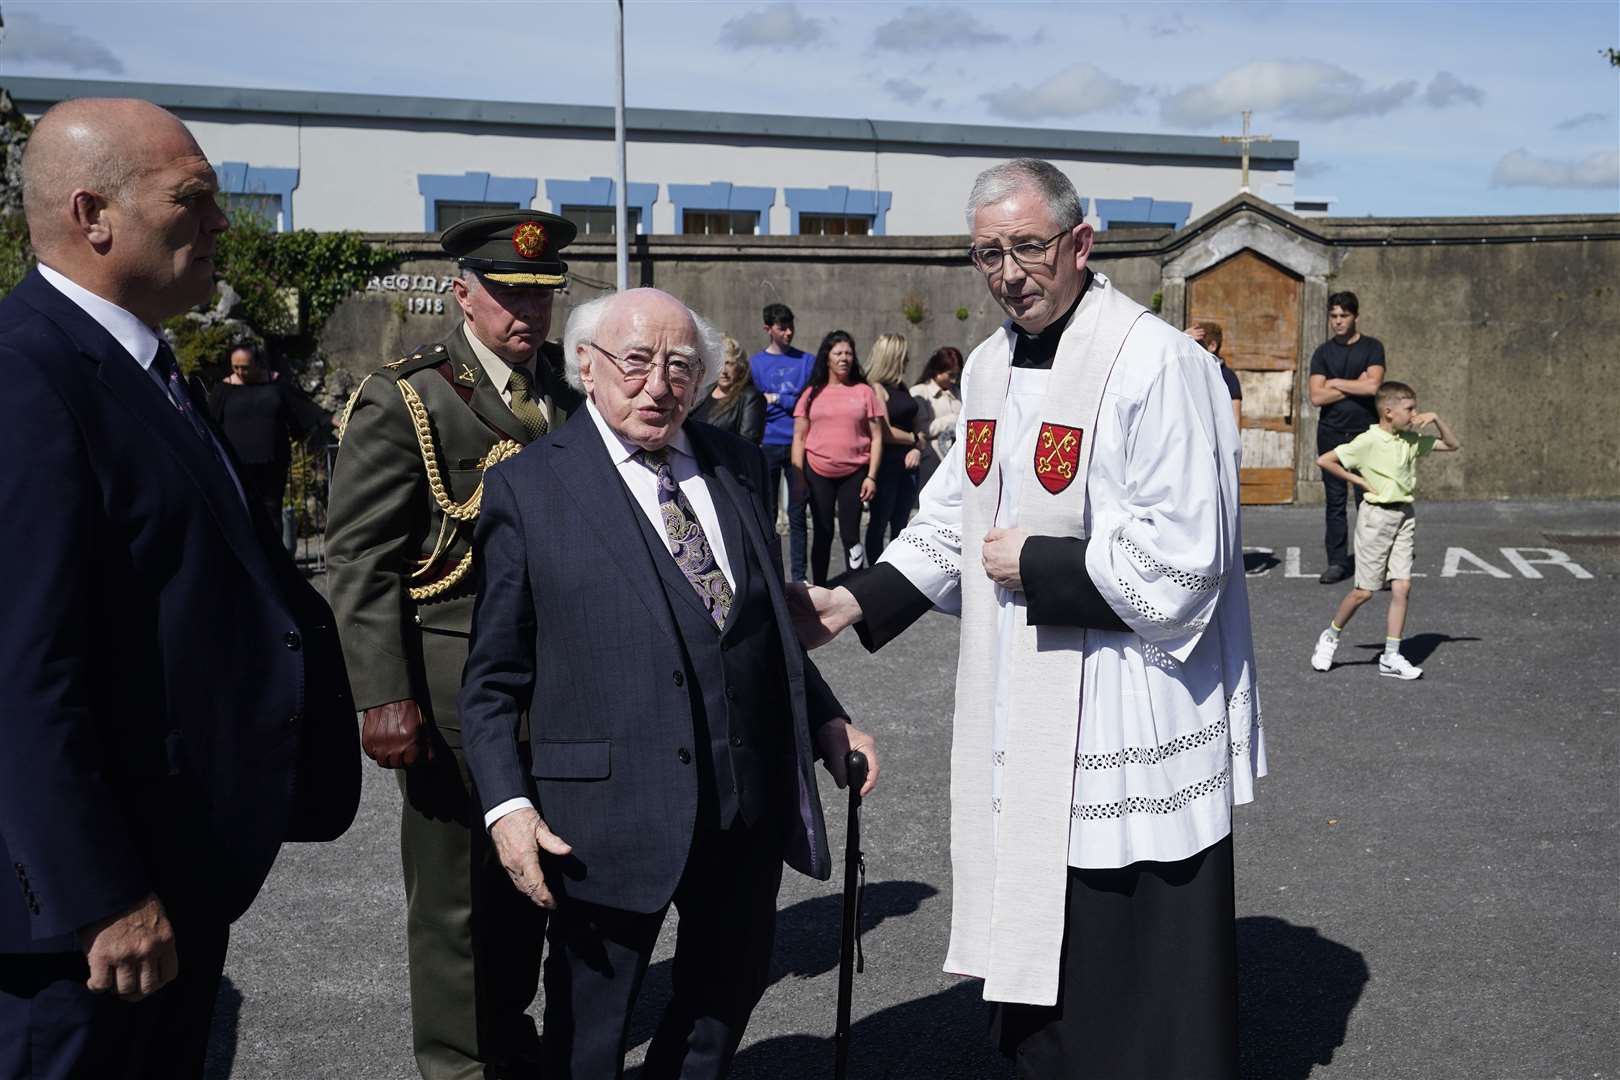 President Michael D Higgins arrives for the funerals at St John the Baptist Church in Cashel, Co Tipperary (Niall Carson/PA)